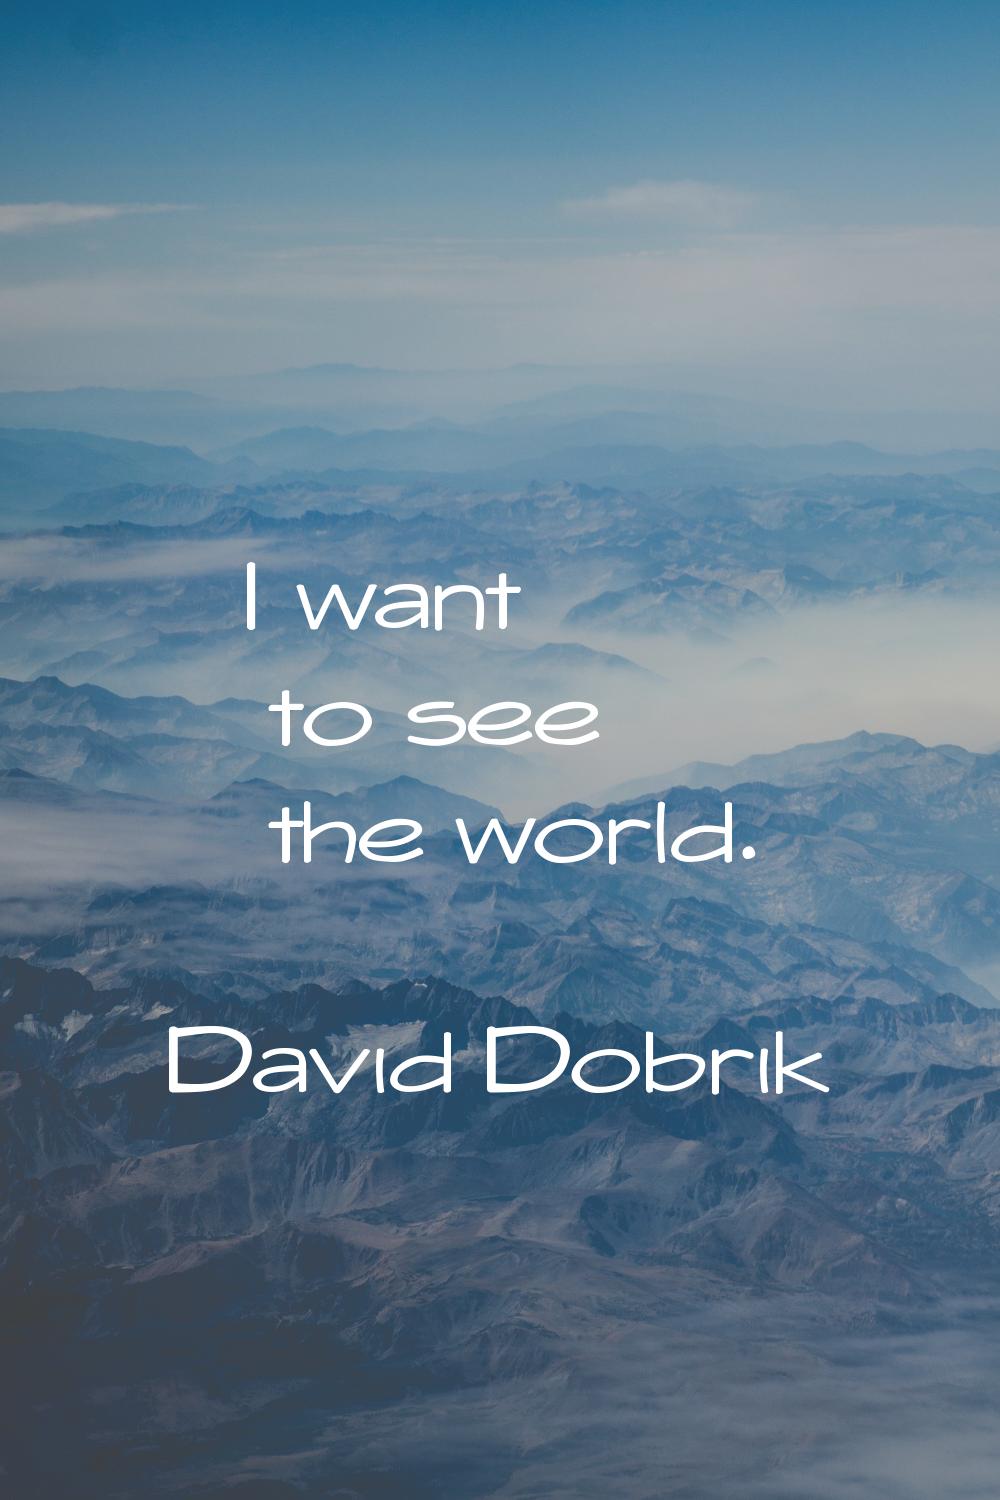 I want to see the world.